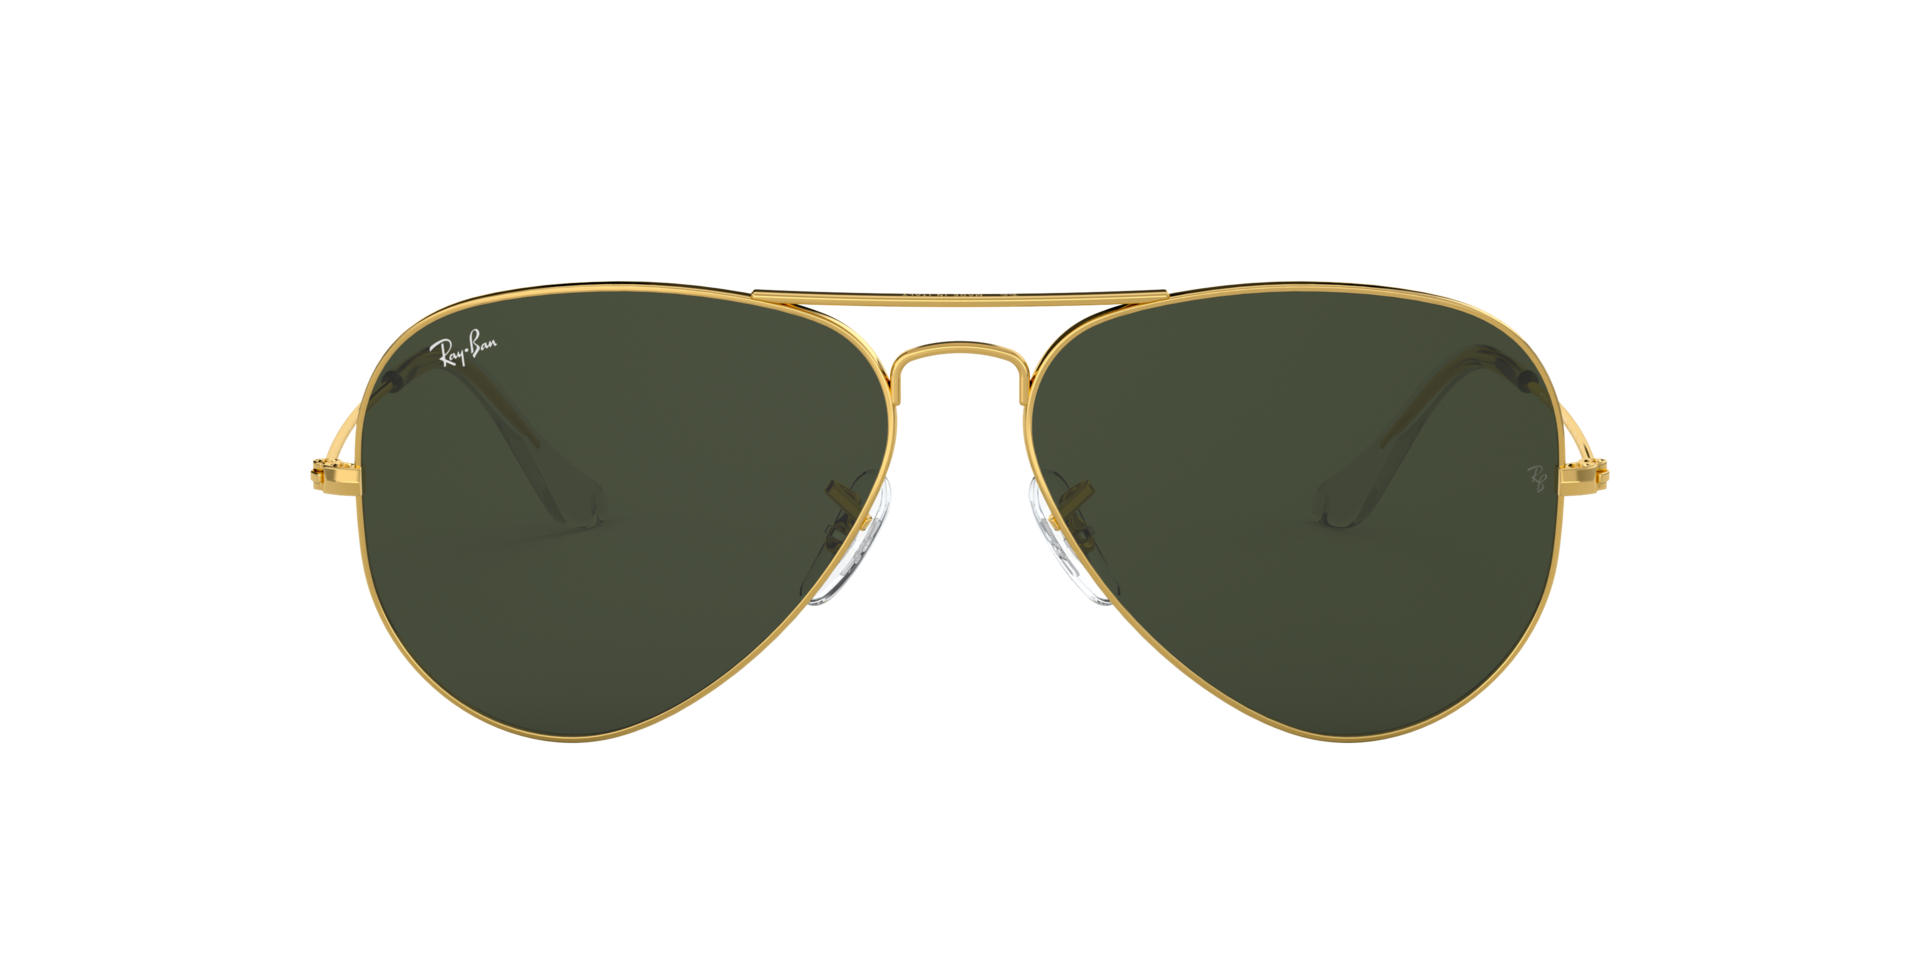 Ray Ban Aviator Large Metal Sonnenbrille in Gold RB3025 001 62